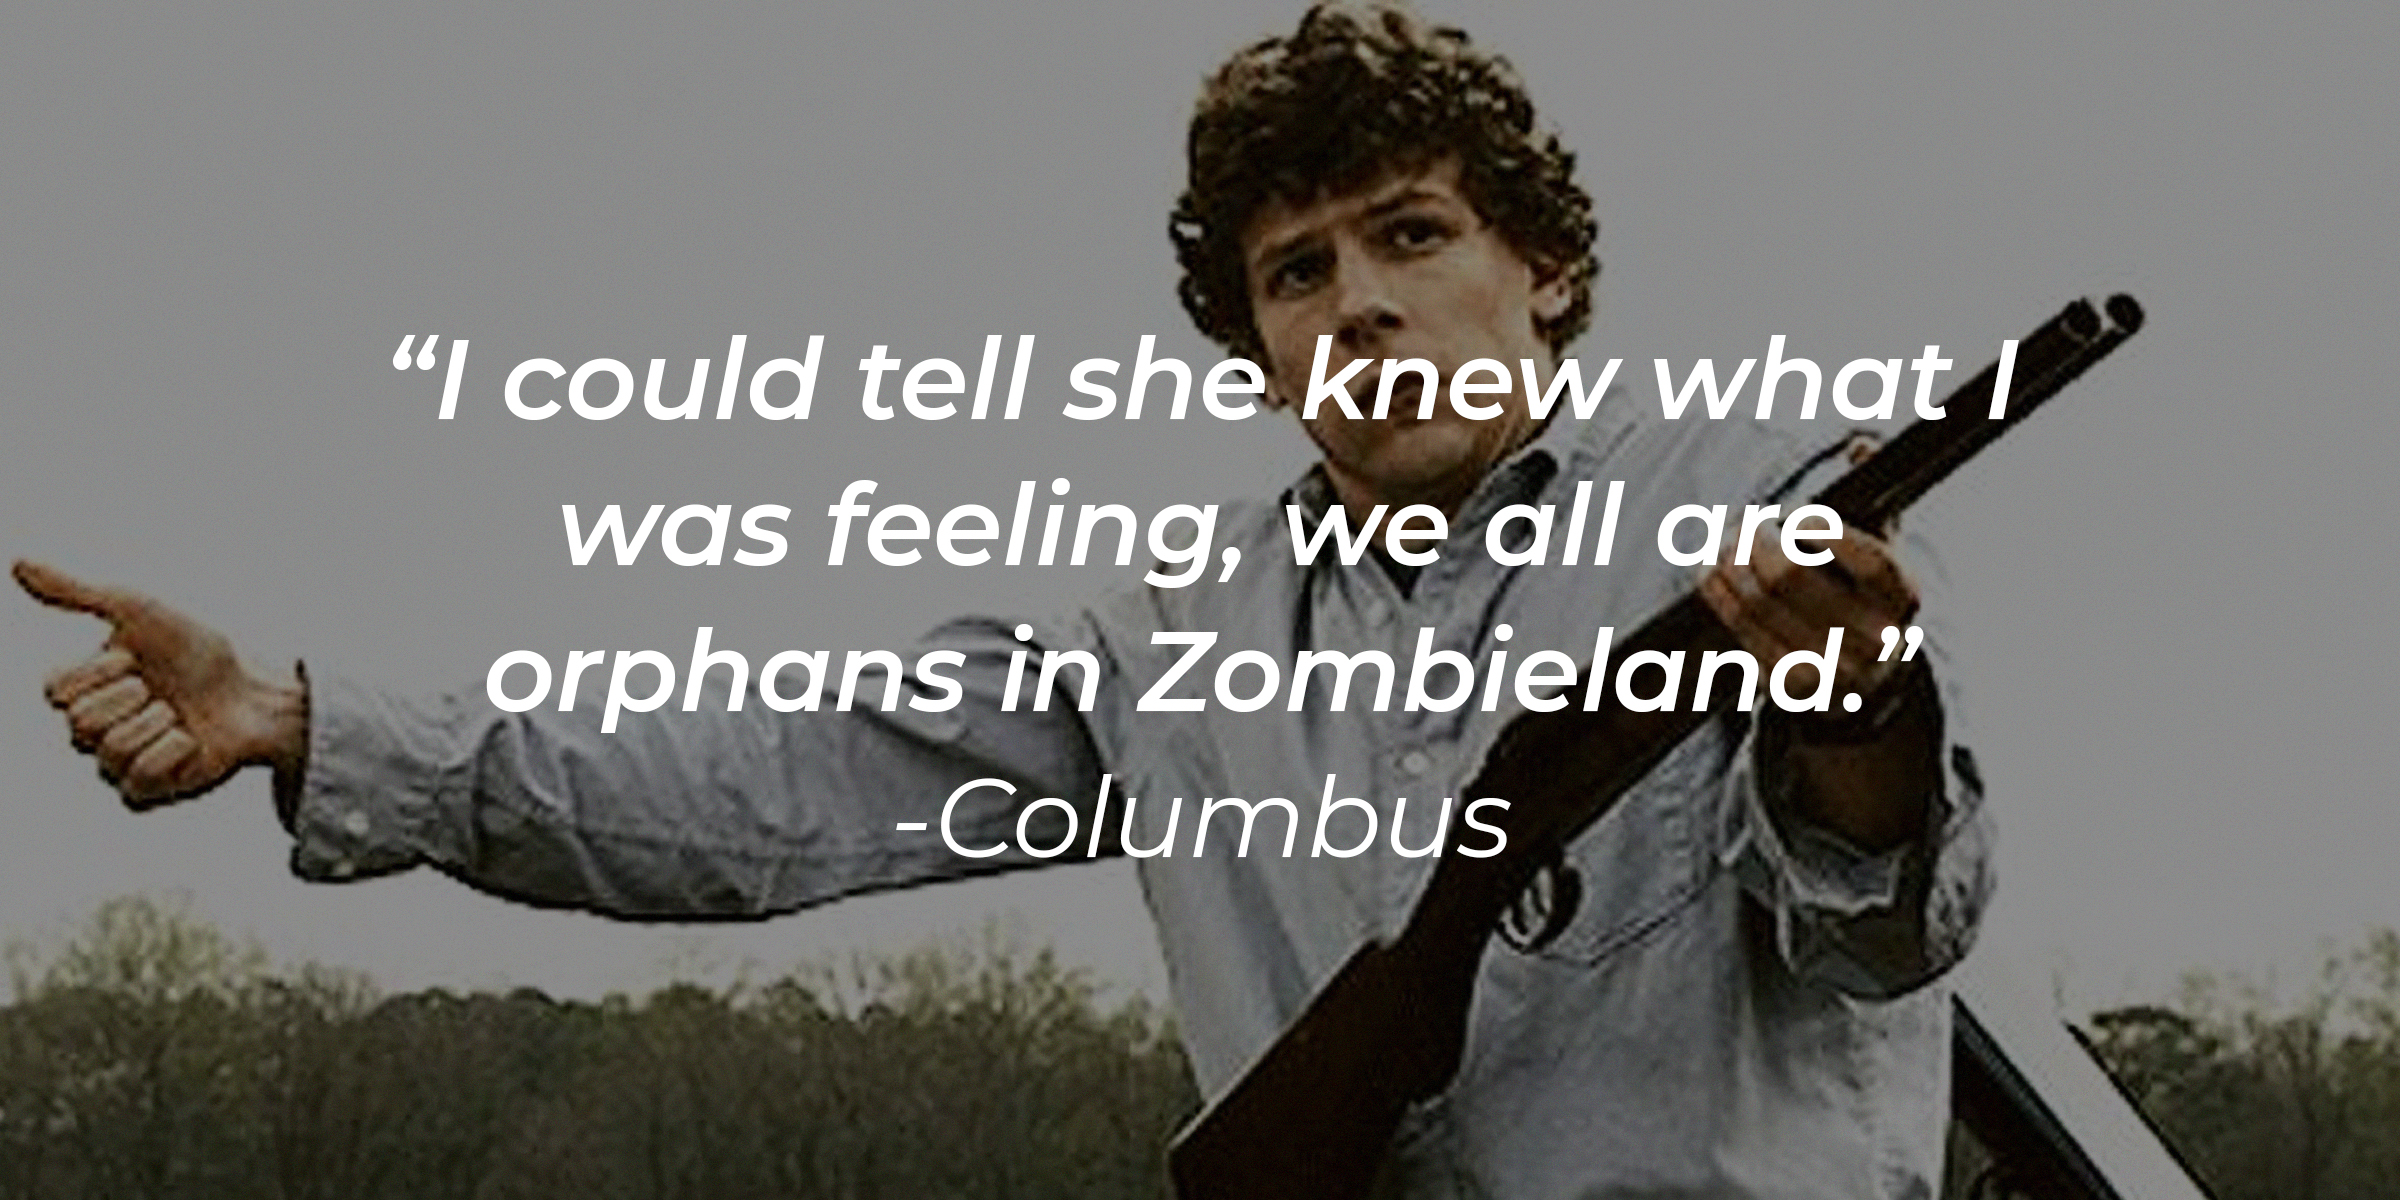 An image of Columbus holding a long firearm with his quote: "I could tell she knew what I was feeling, we all are orphans in Zombieland." | Source: Facebook.com/Zombieland